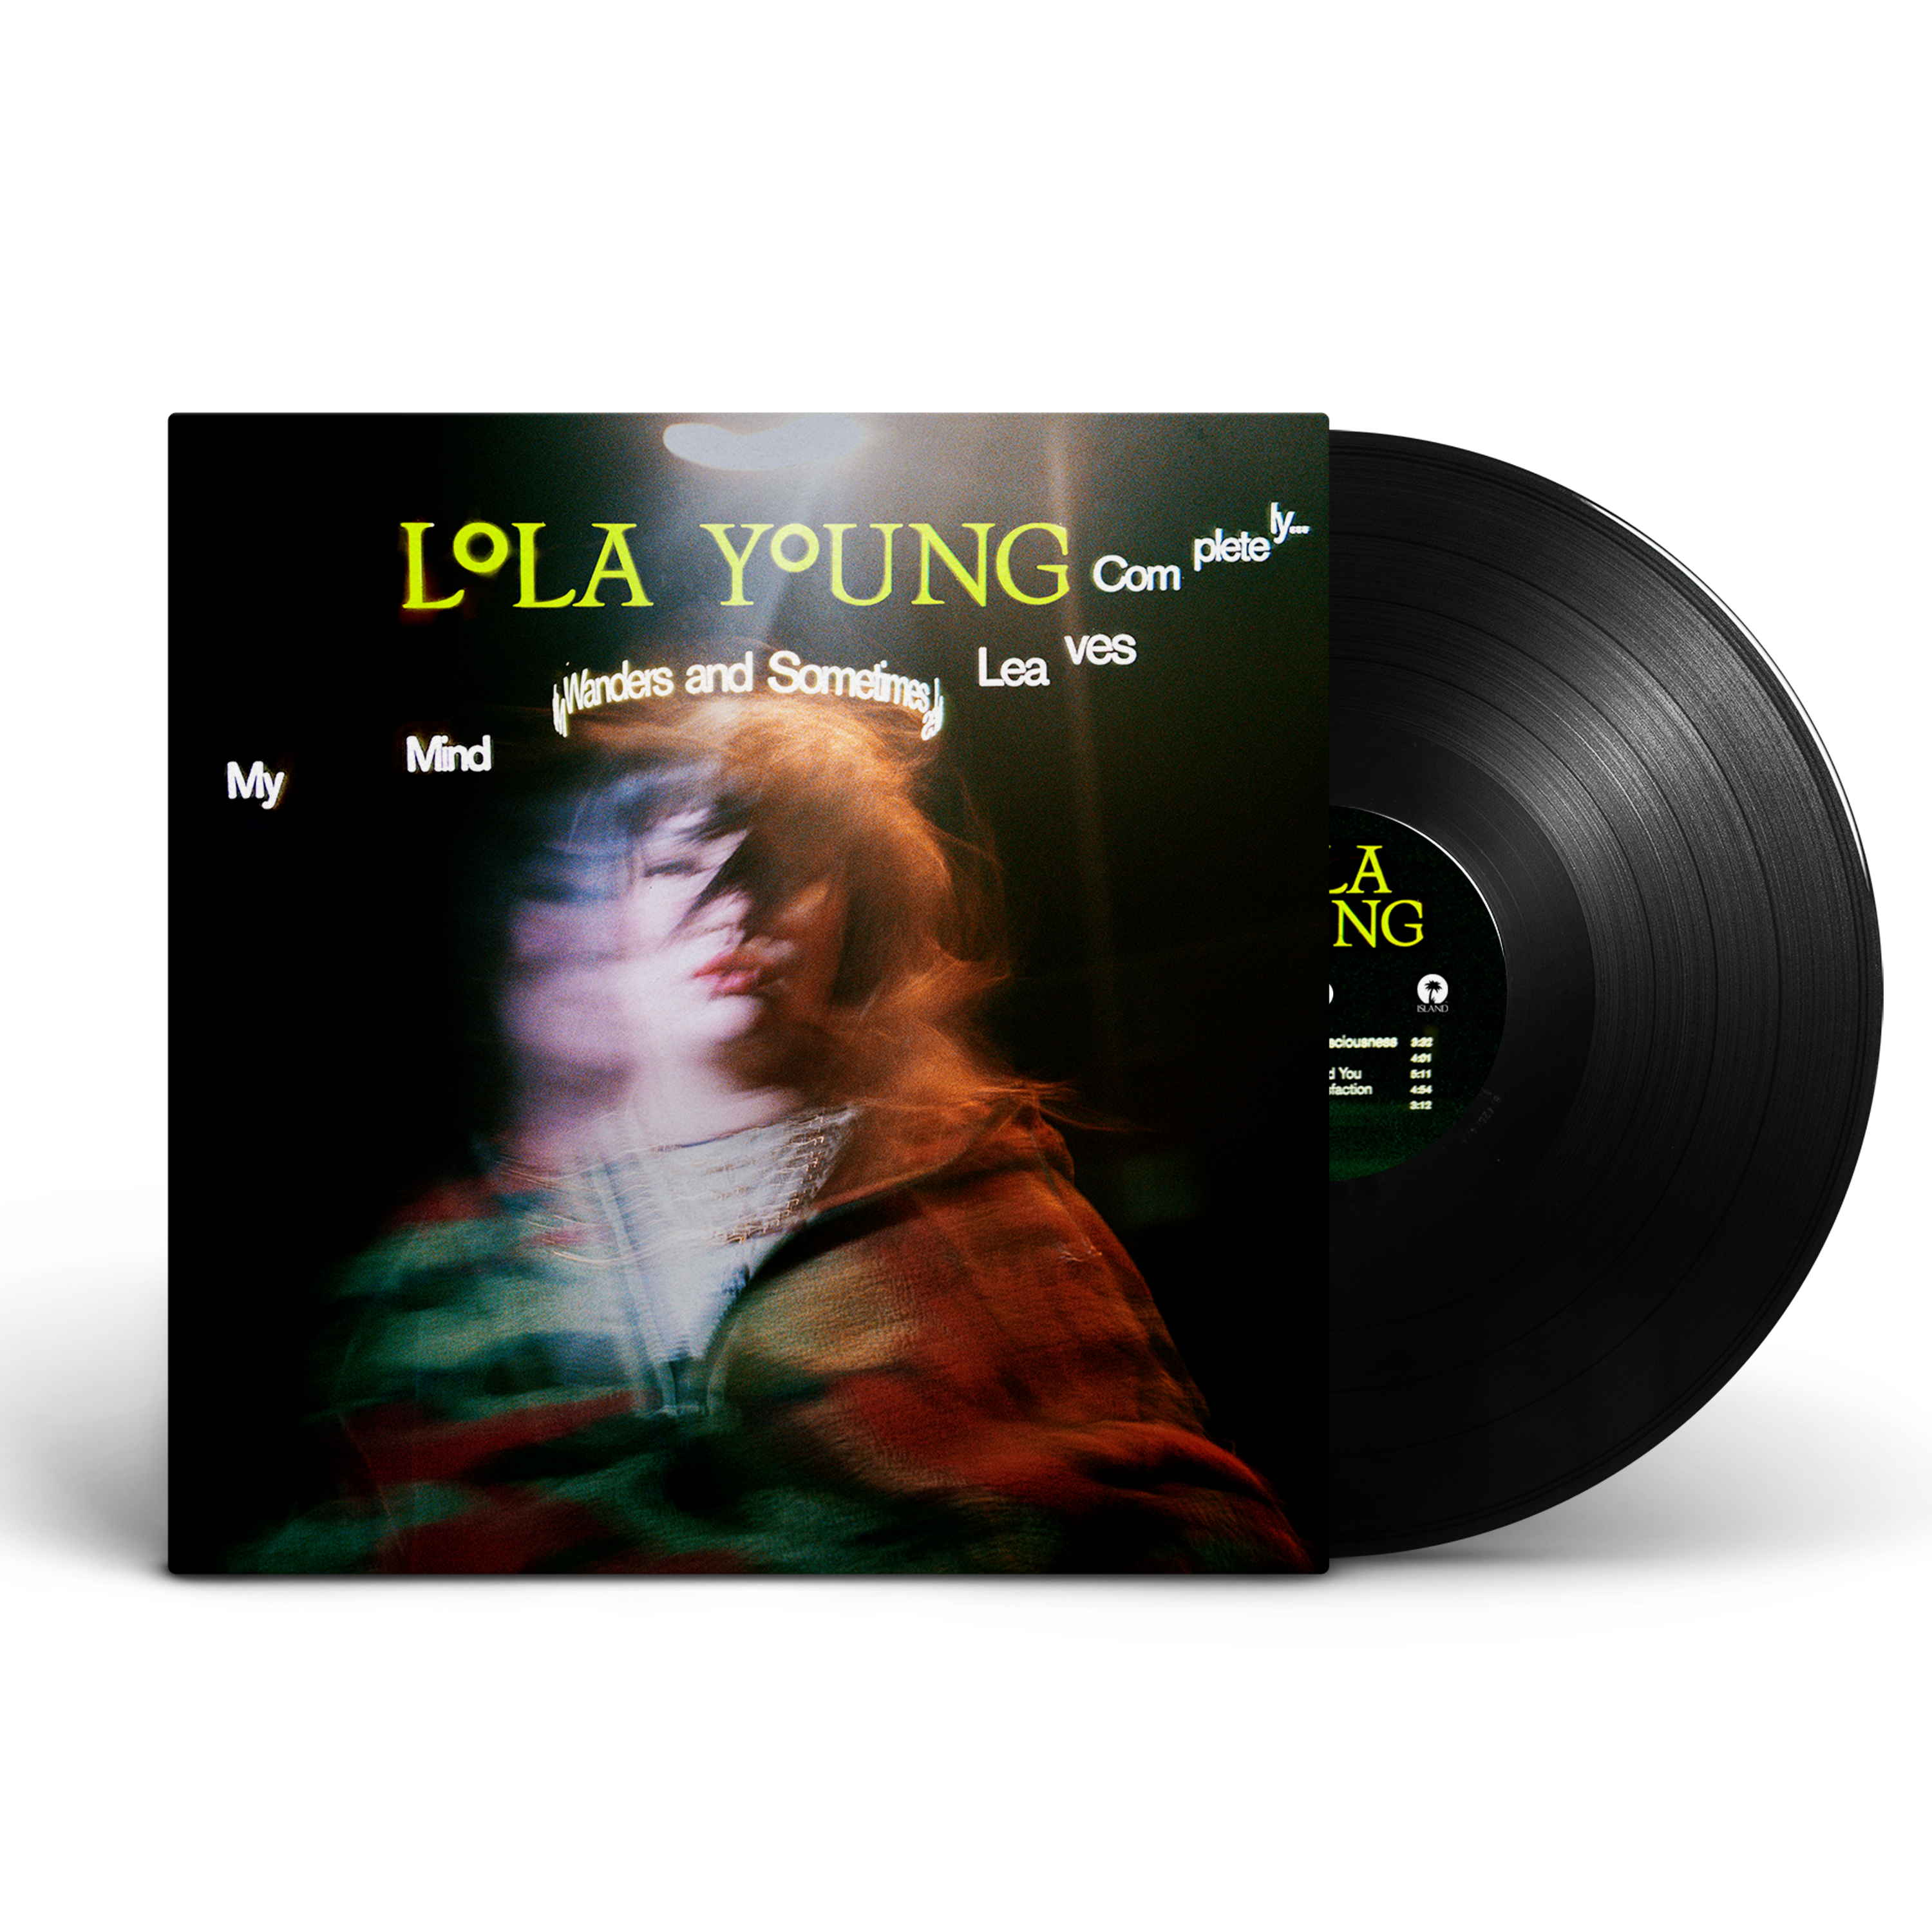 Lola Young - My Mind Wanders and Sometimes Leaves Completely: Vinyl LP 